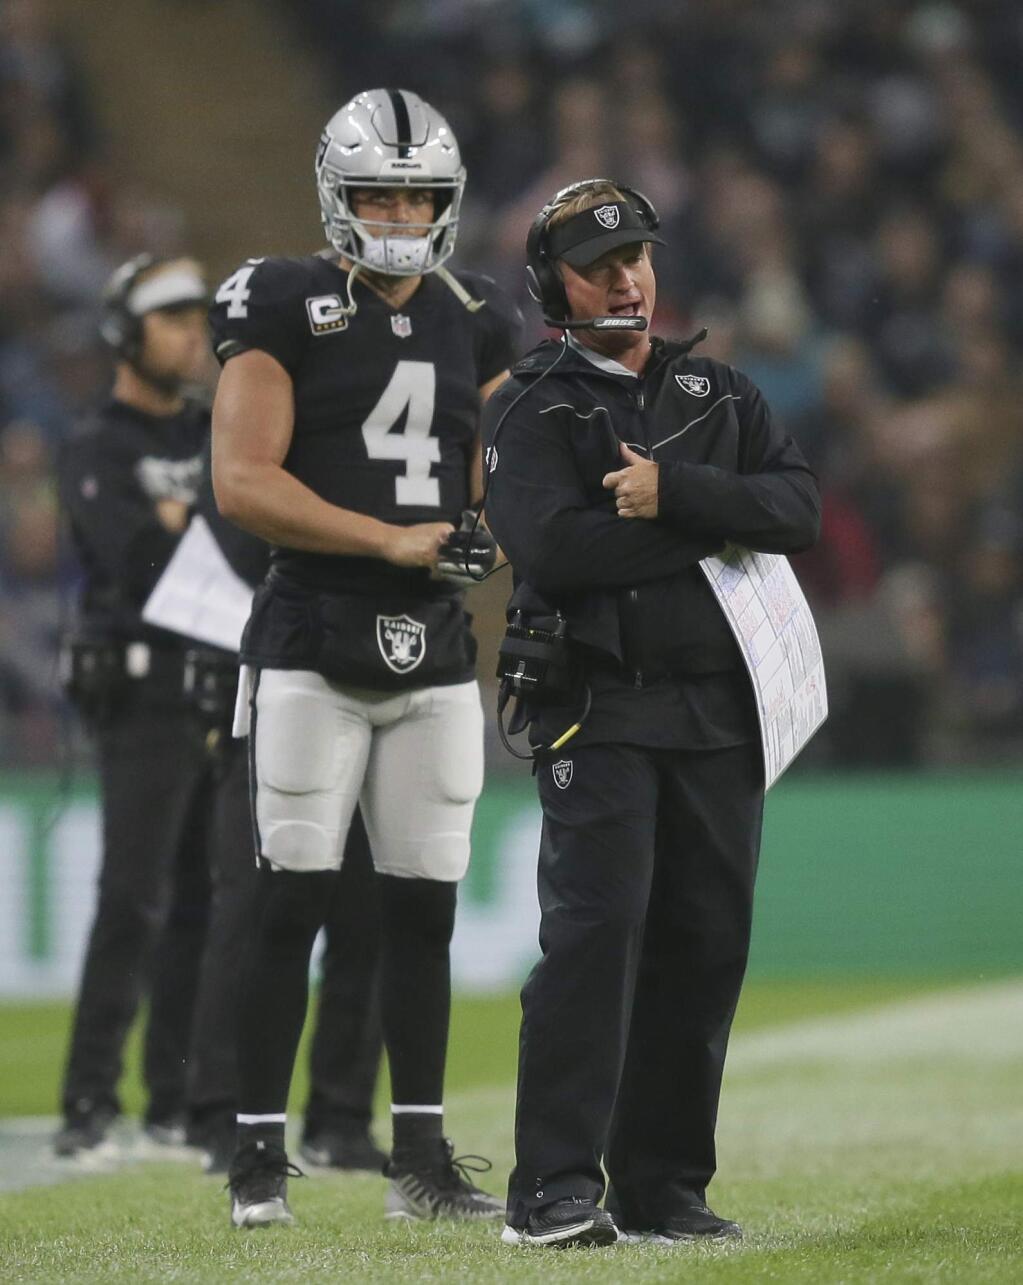 Oakland Raiders head coach Jon Gruden on the sideline during the first half against the Seattle Seahawks at Wembley stadium in London, Sunday, Oct. 14, 2018. (AP Photo/Tim Ireland)